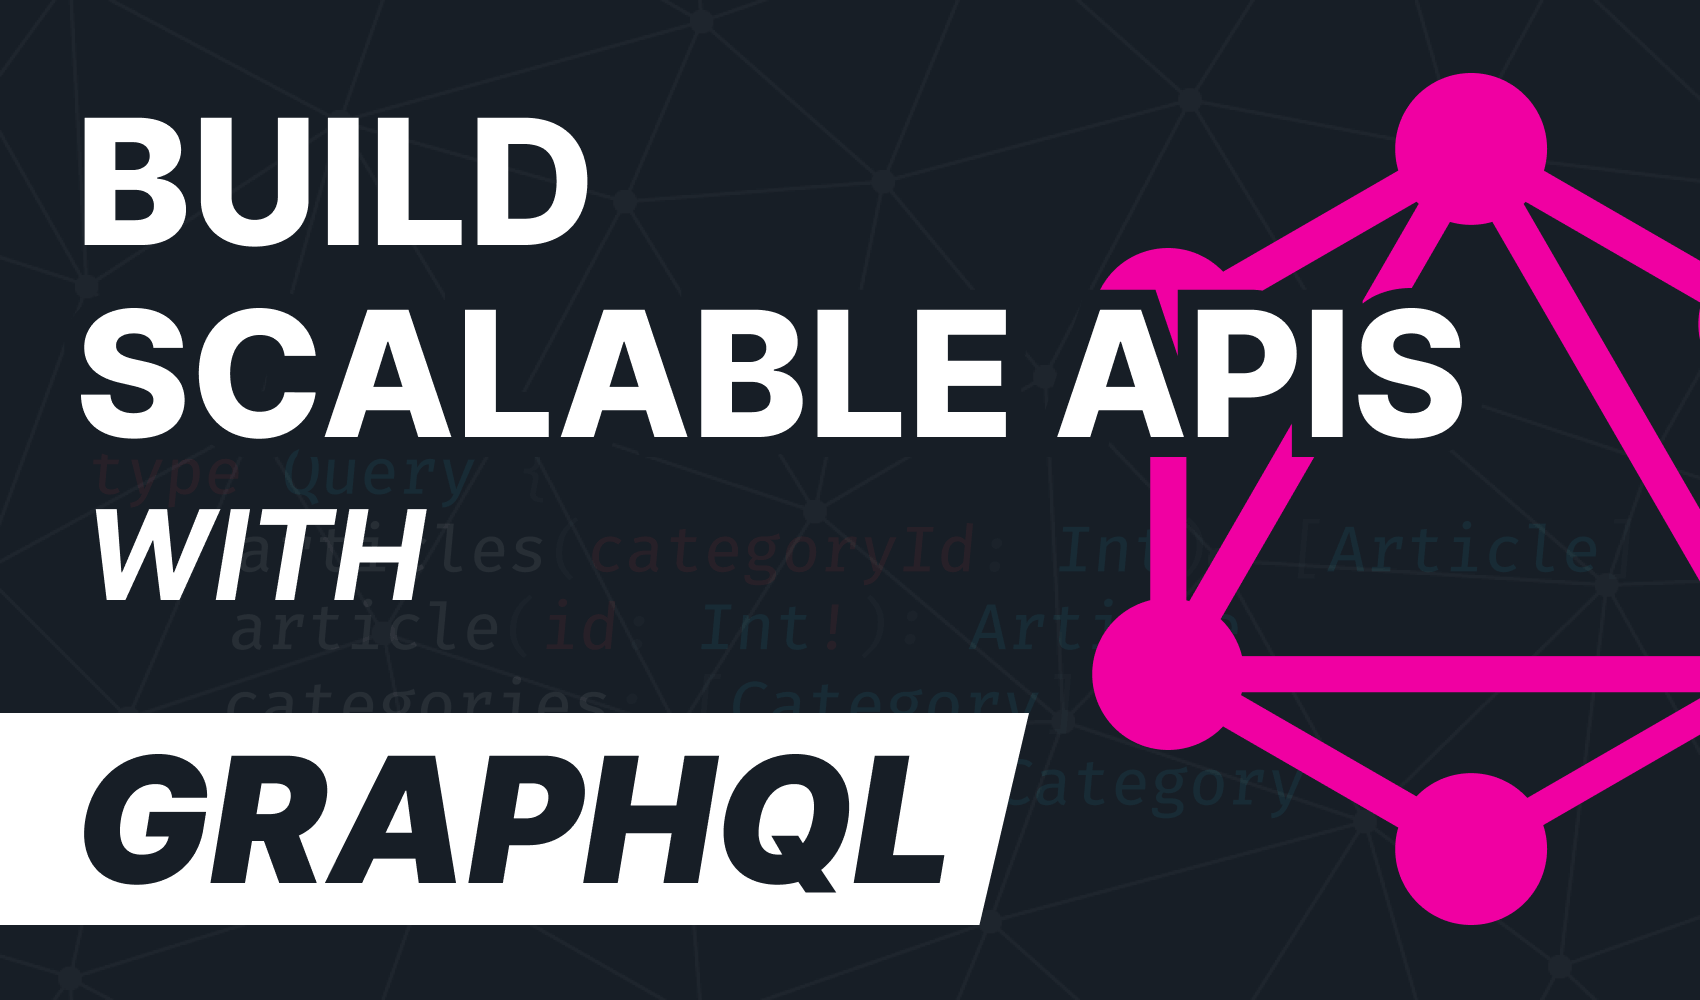 How to Get Started With GraphQL